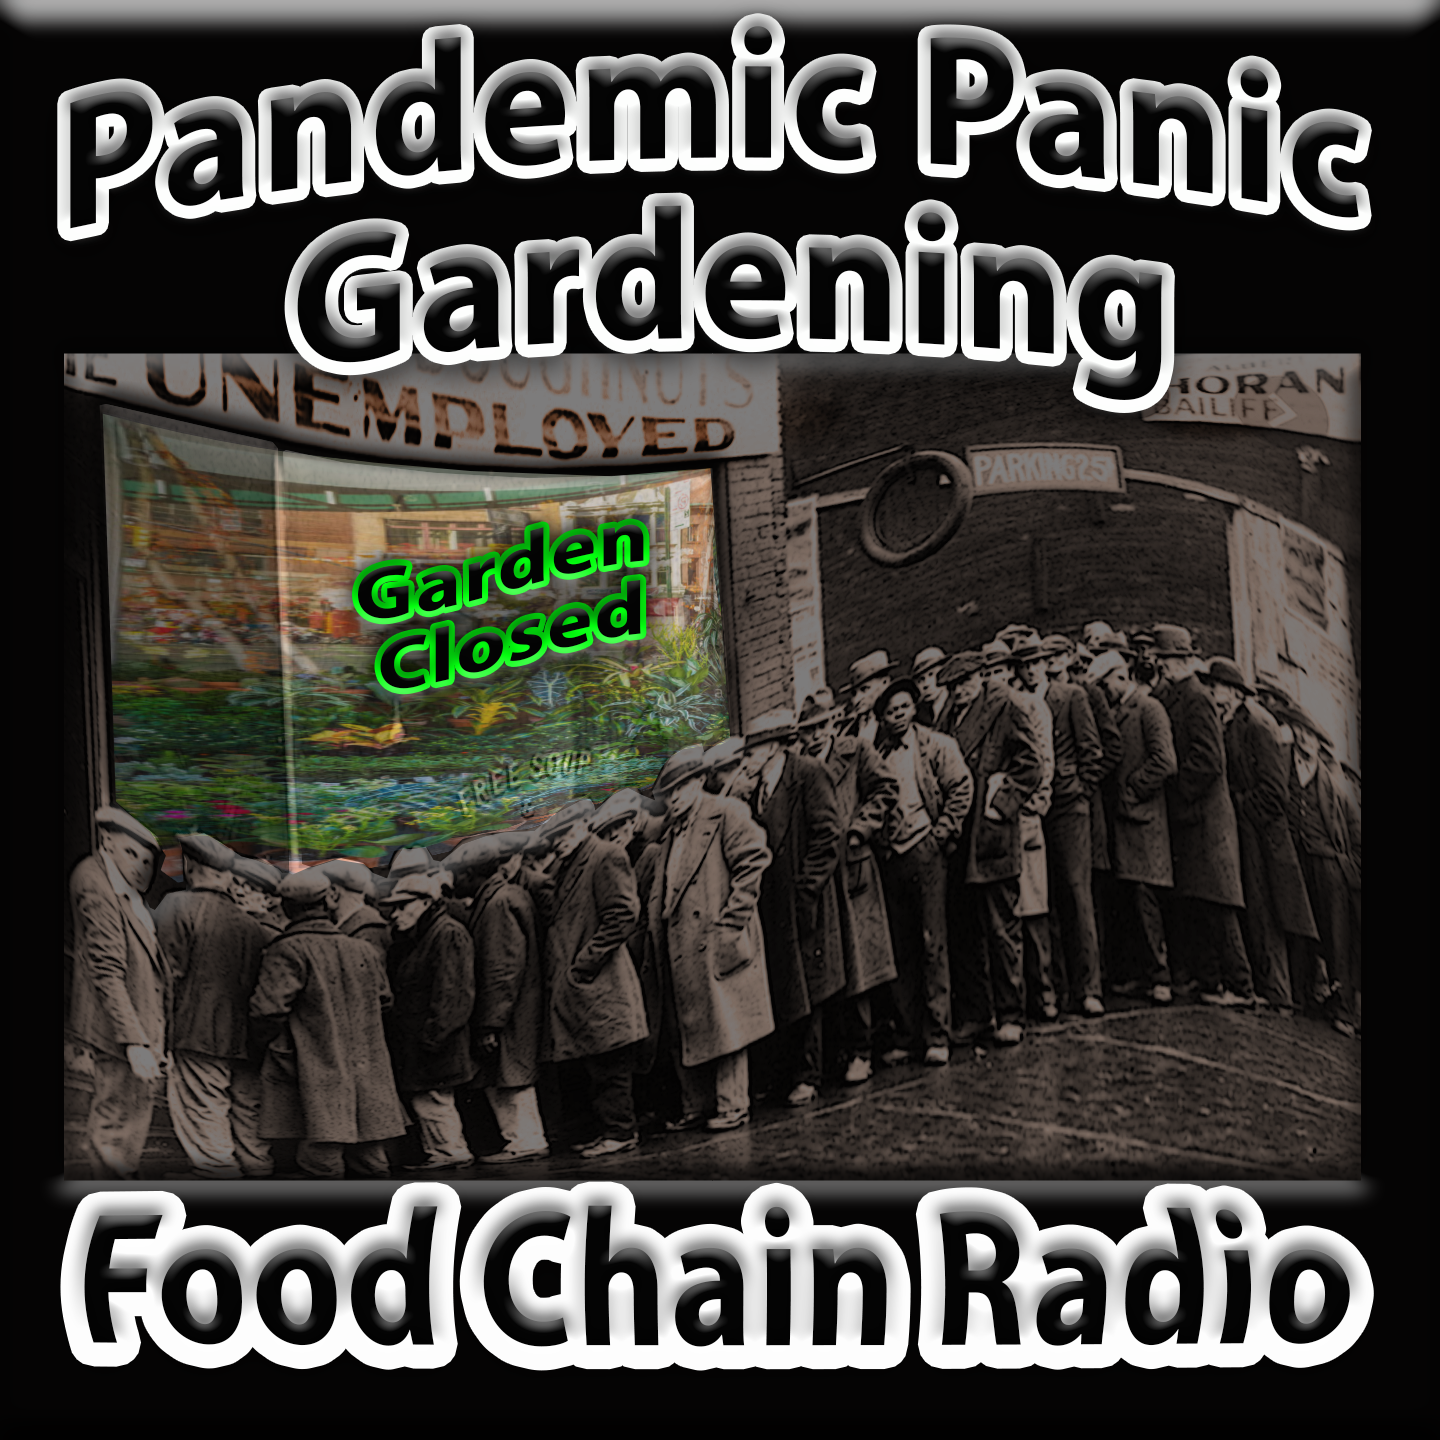 Michael Olson Food Chain Radio – Should gardening be certified an essential pandemic panic activity?